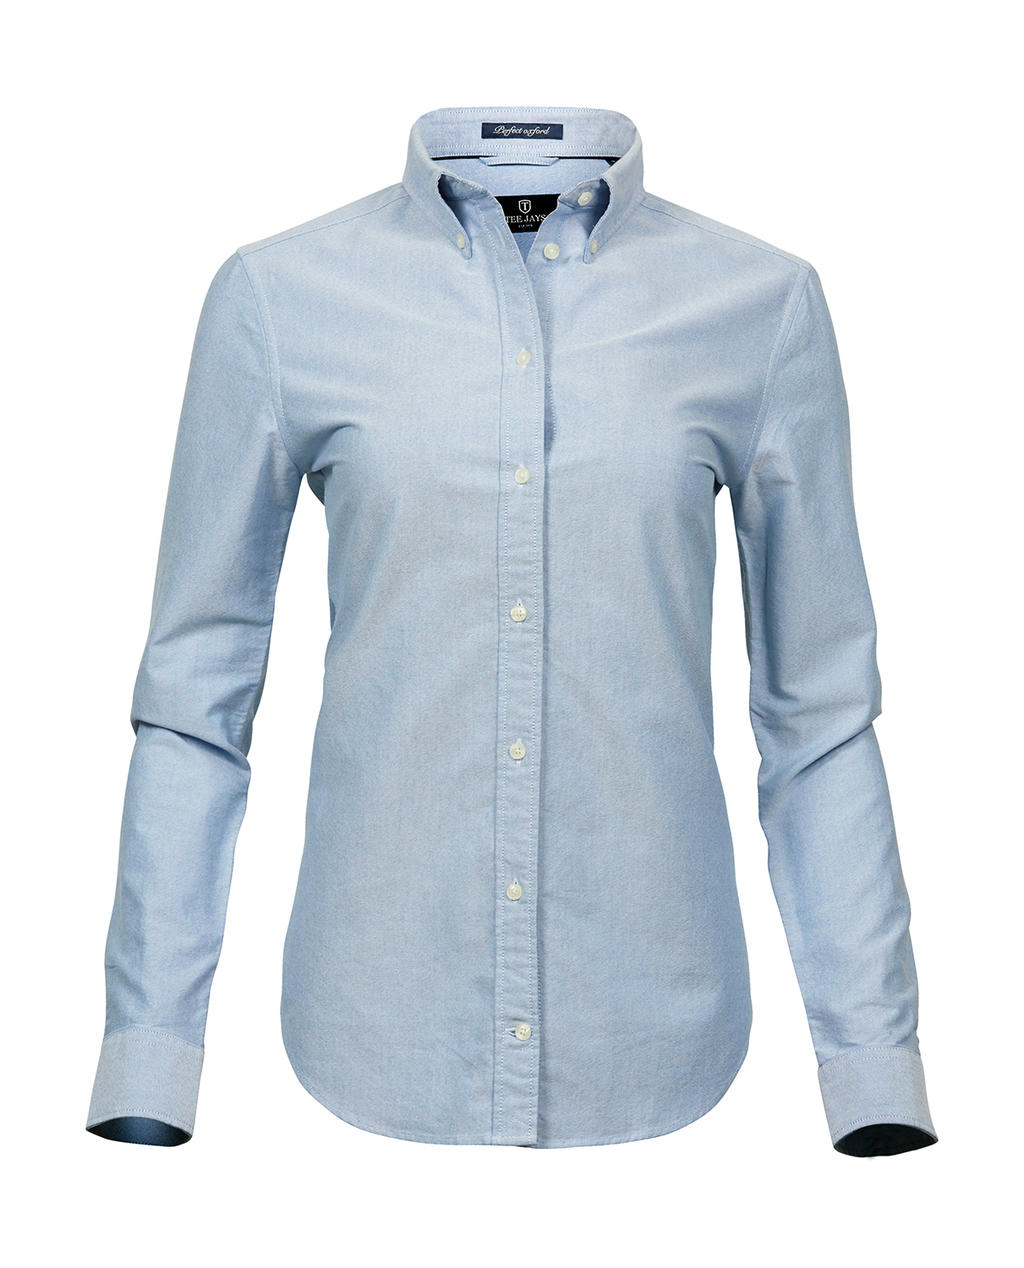  Ladies Perfect Oxford Shirt in Farbe Light Blue